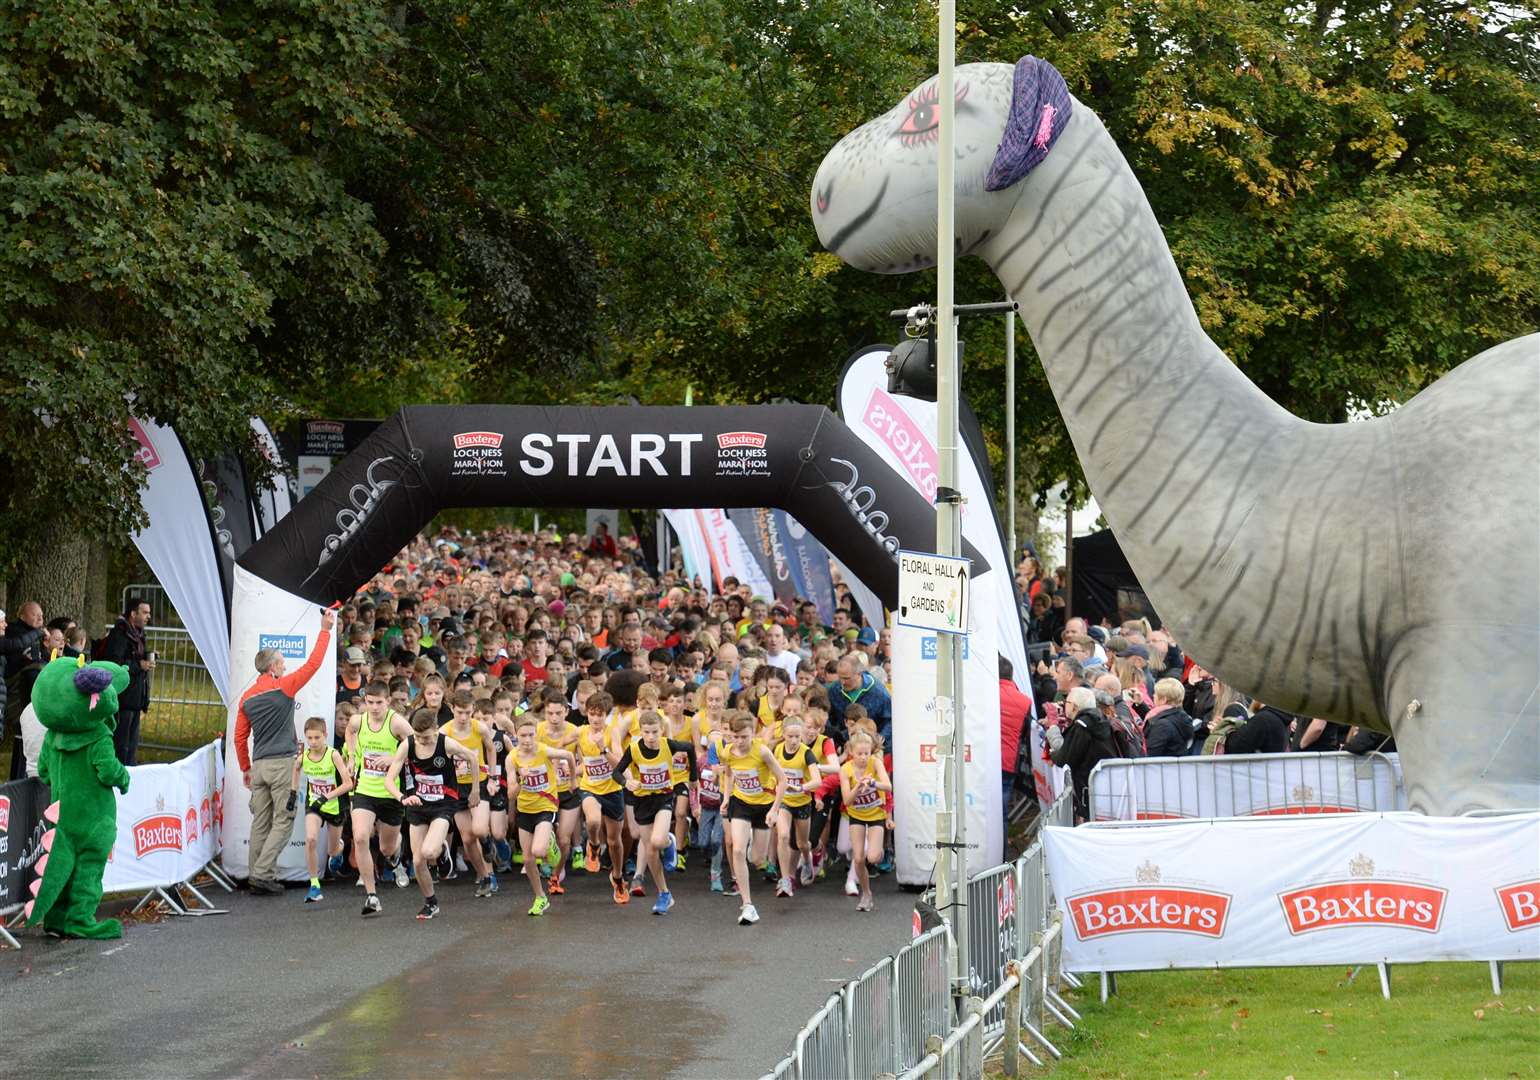 More runners than ever before will compete in Sunday's Loch Ness Marathon, 10k and 5k races as part of the annual Festival of Running.